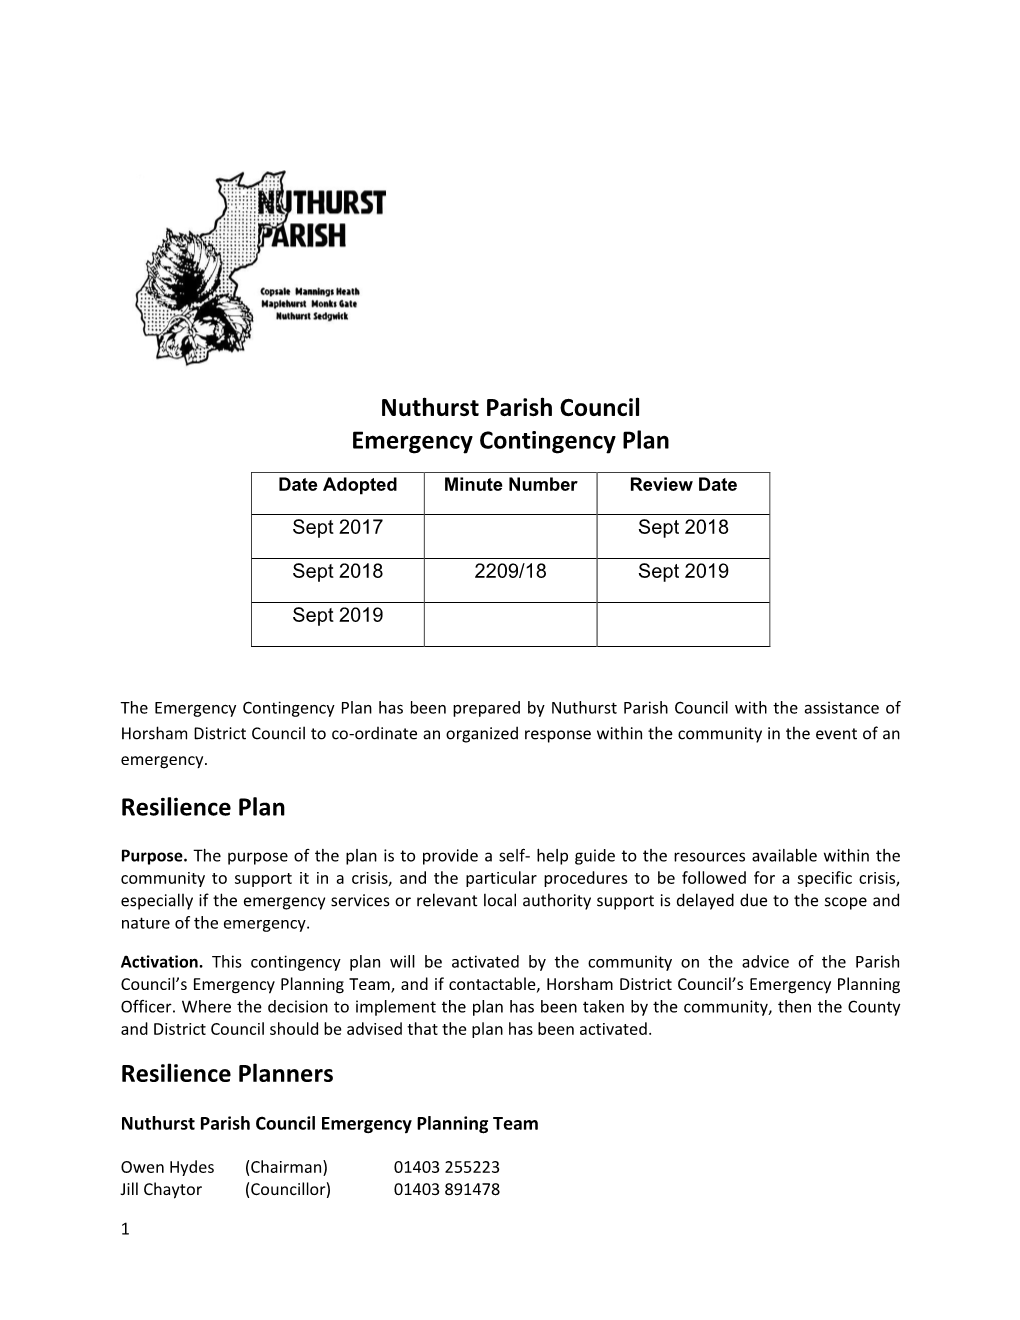 Nuthurst Parish Council Emergency Contingency Plan Resilience Plan